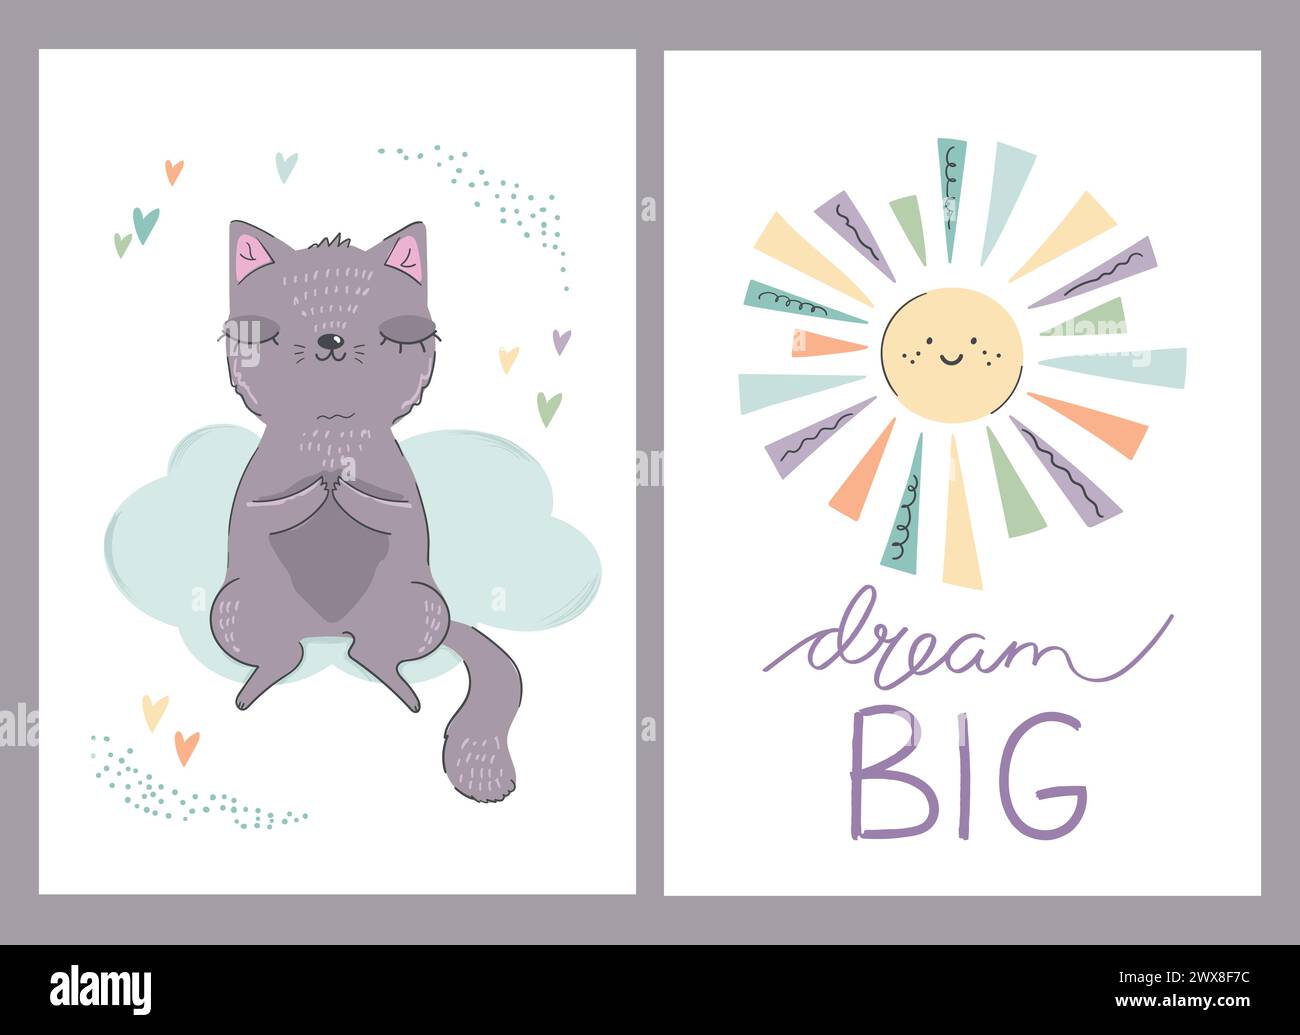 Cute baby cards with a cat and rainbow colored sun. Dream big hand drawn quote. For baby shower, invitations, greeting cards. Vector illustrations. Stock Vector